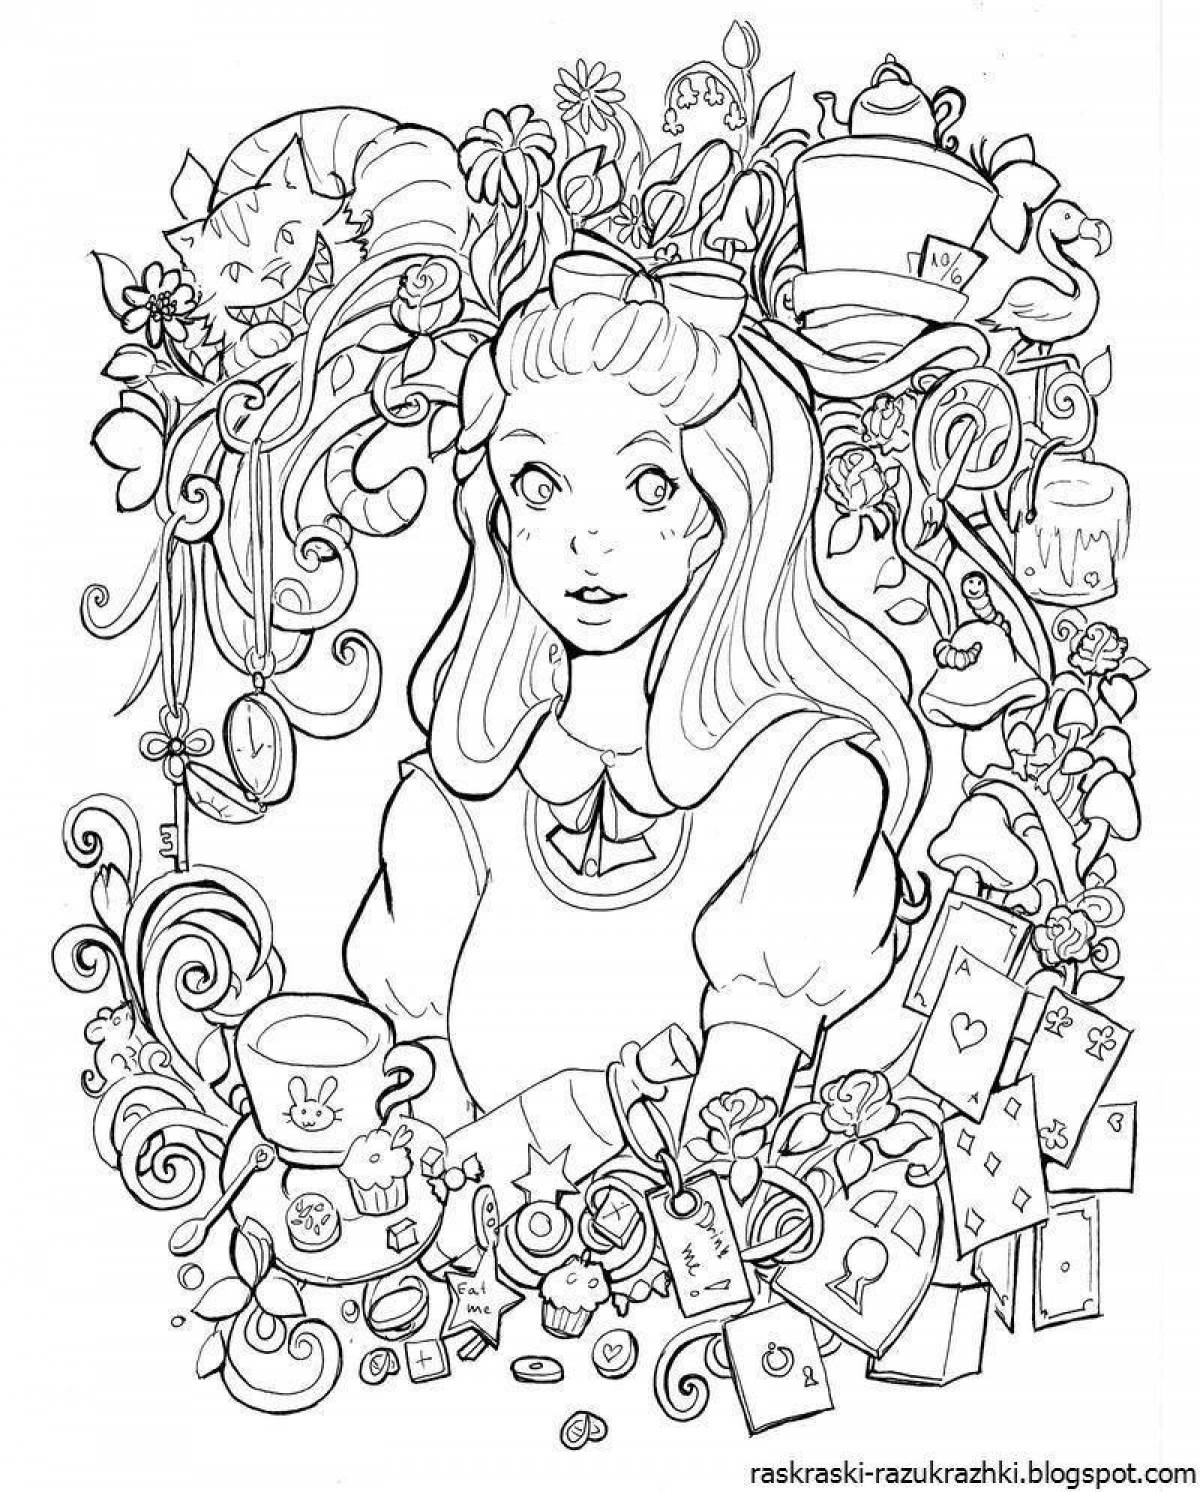 Colourful alice coloring for girls